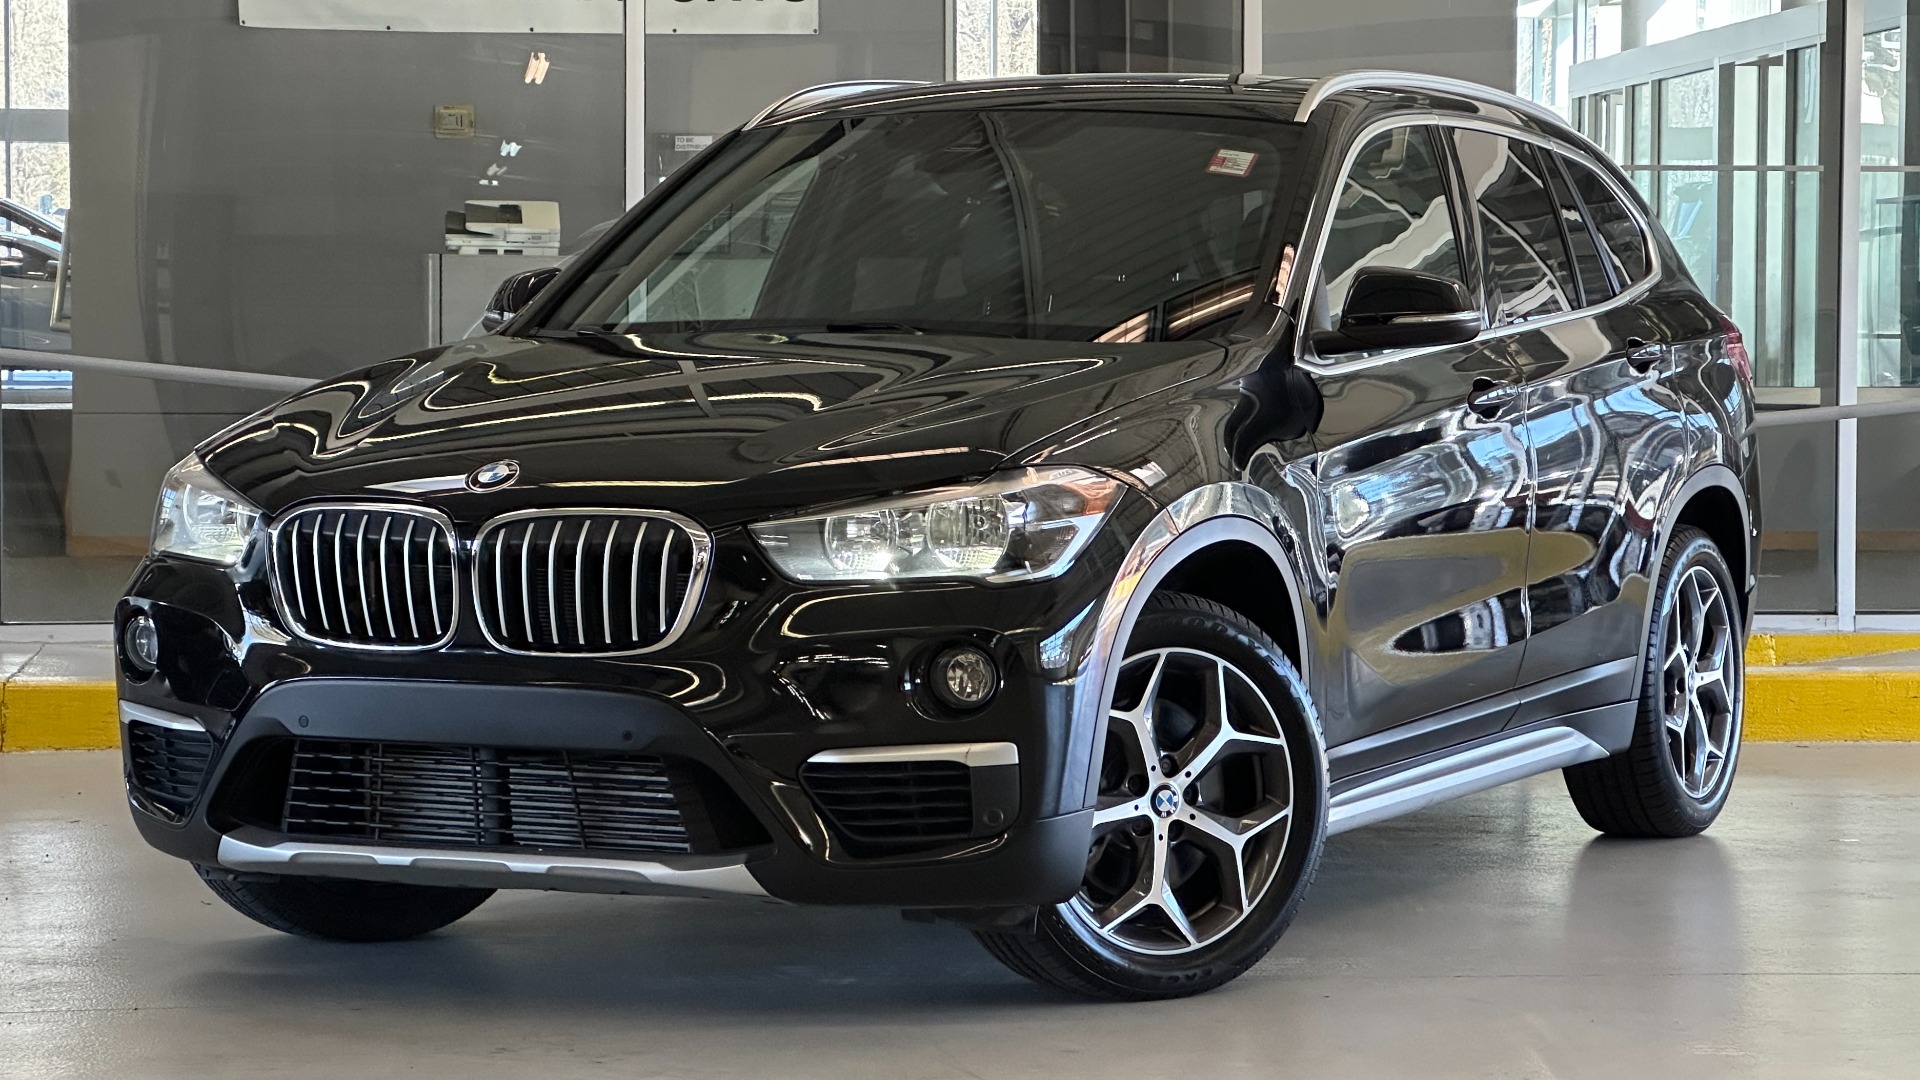 Used 2019 BMW X1 xDrive28i / CONVENIENCE PACKAGE / HEATED STEERING for sale $28,000 at Formula Imports in Charlotte NC 28227 1